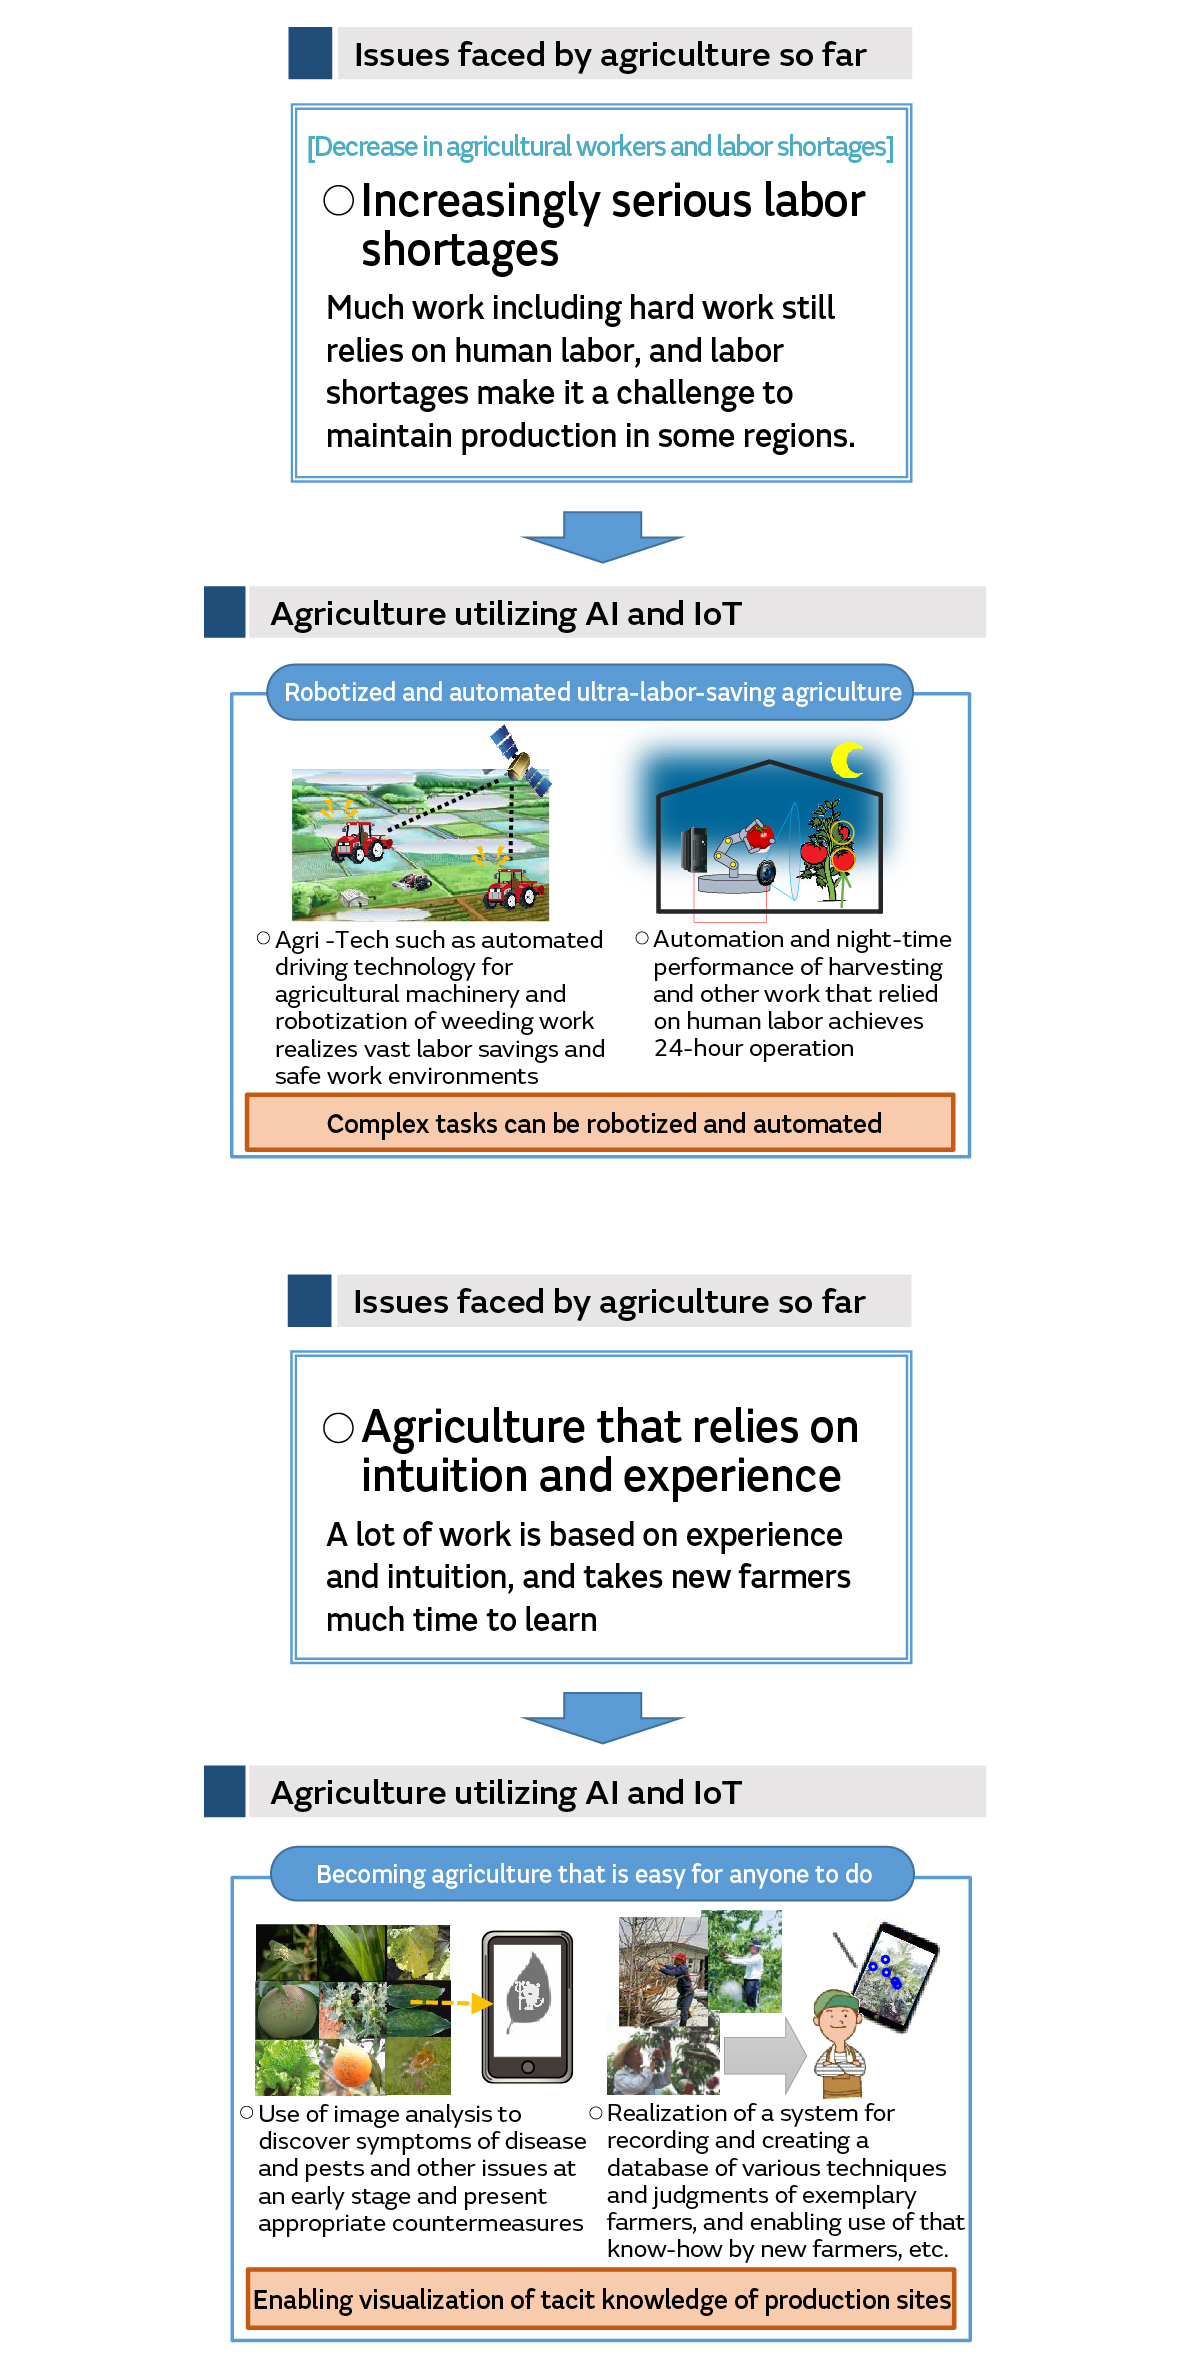 Image 2 of “Agri-Tech” Brings Out the Potential of Land and Crops